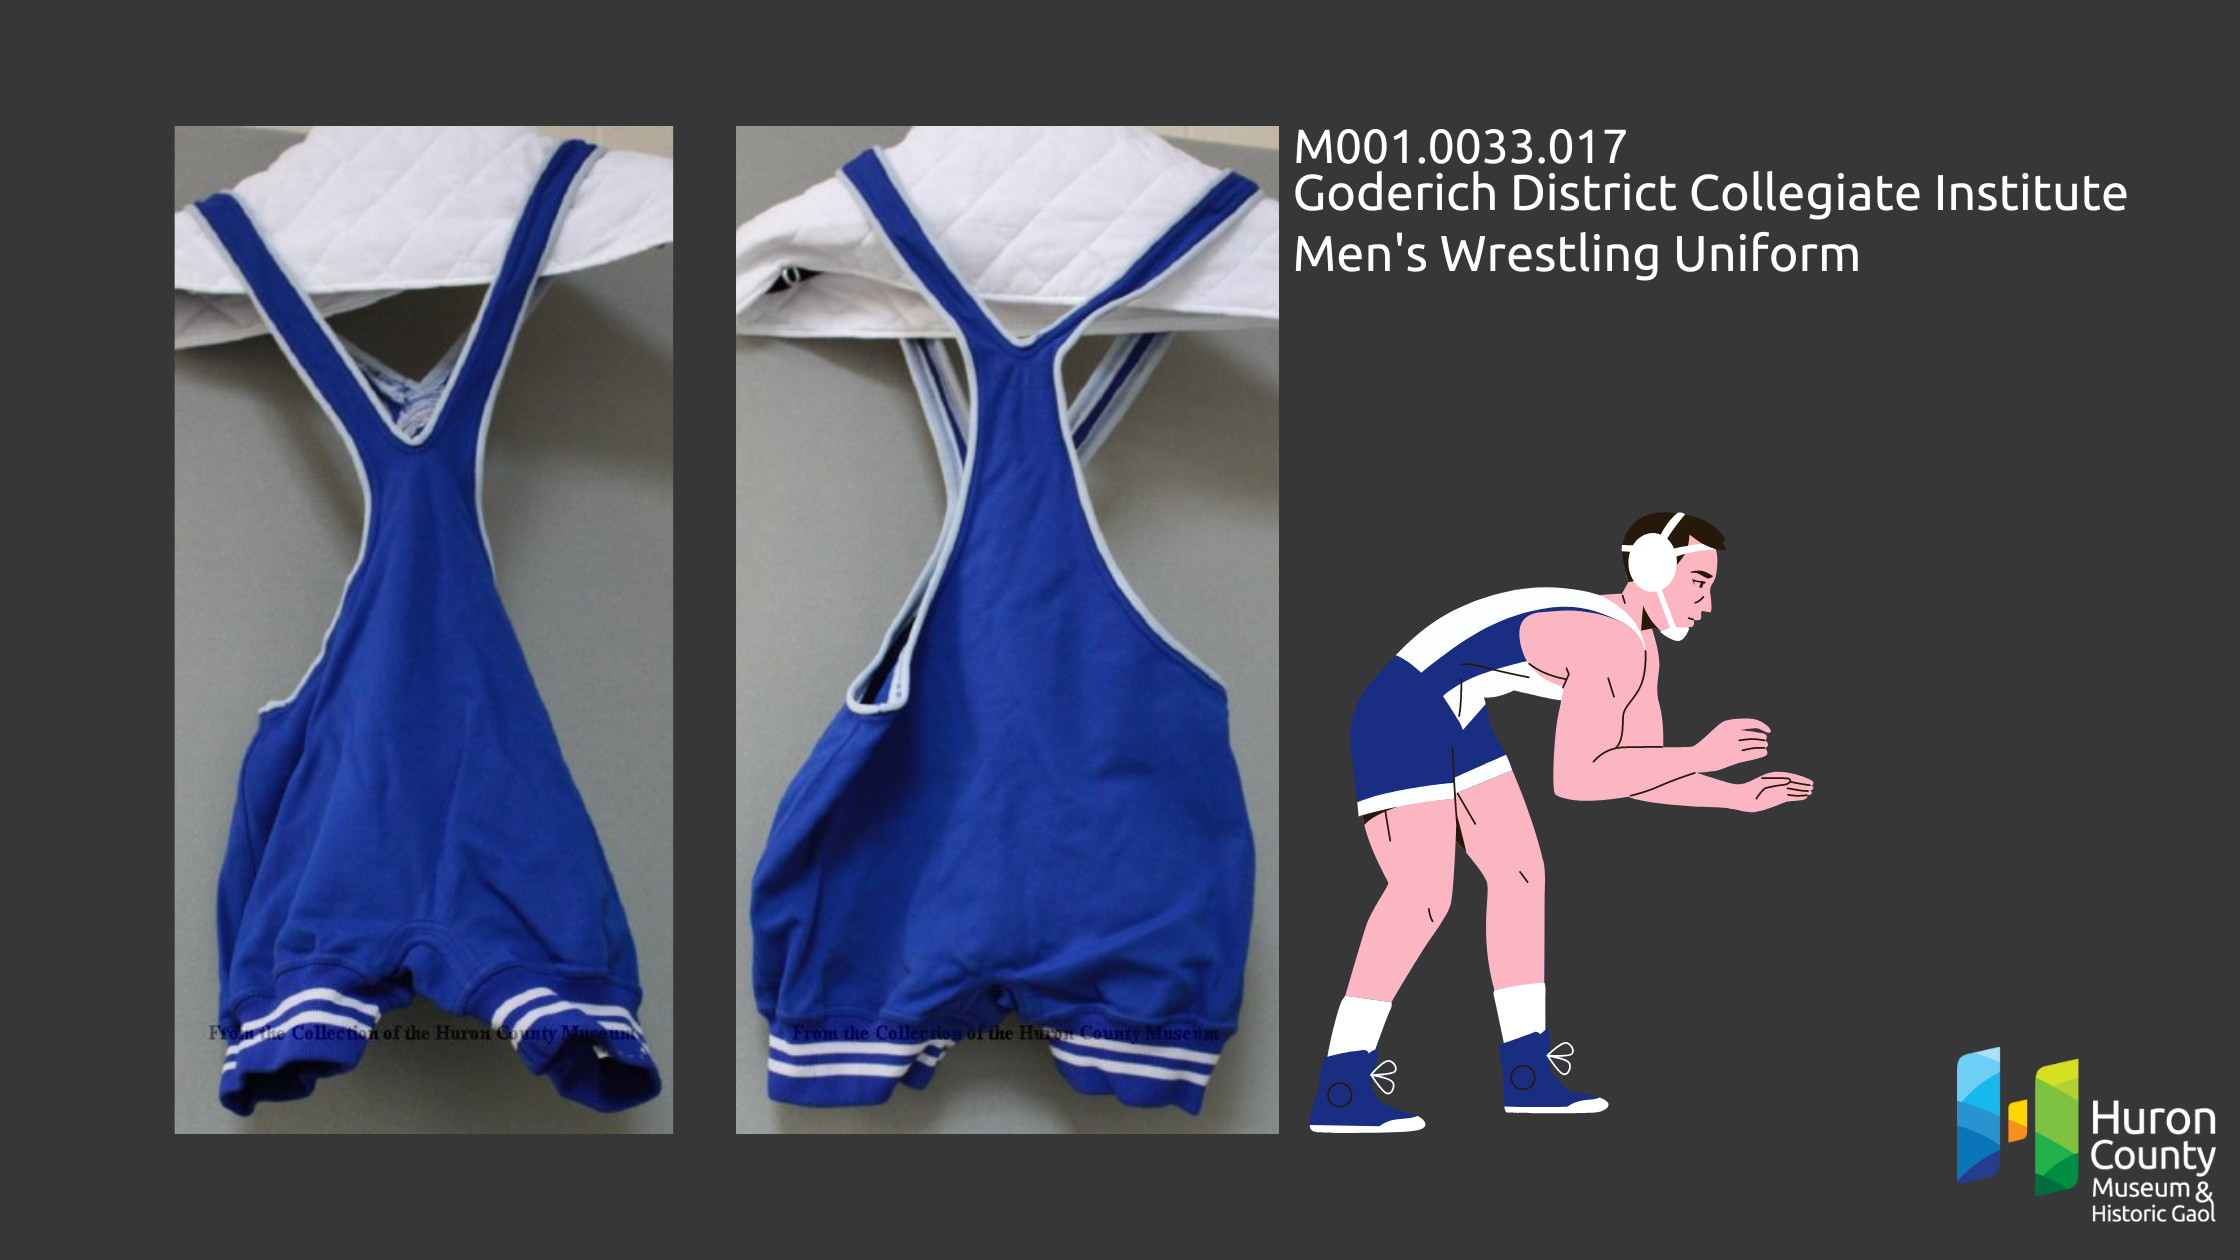 Two images of a Goderich District Collegiate Institute wrestling uniform with an illustration of a wrestler